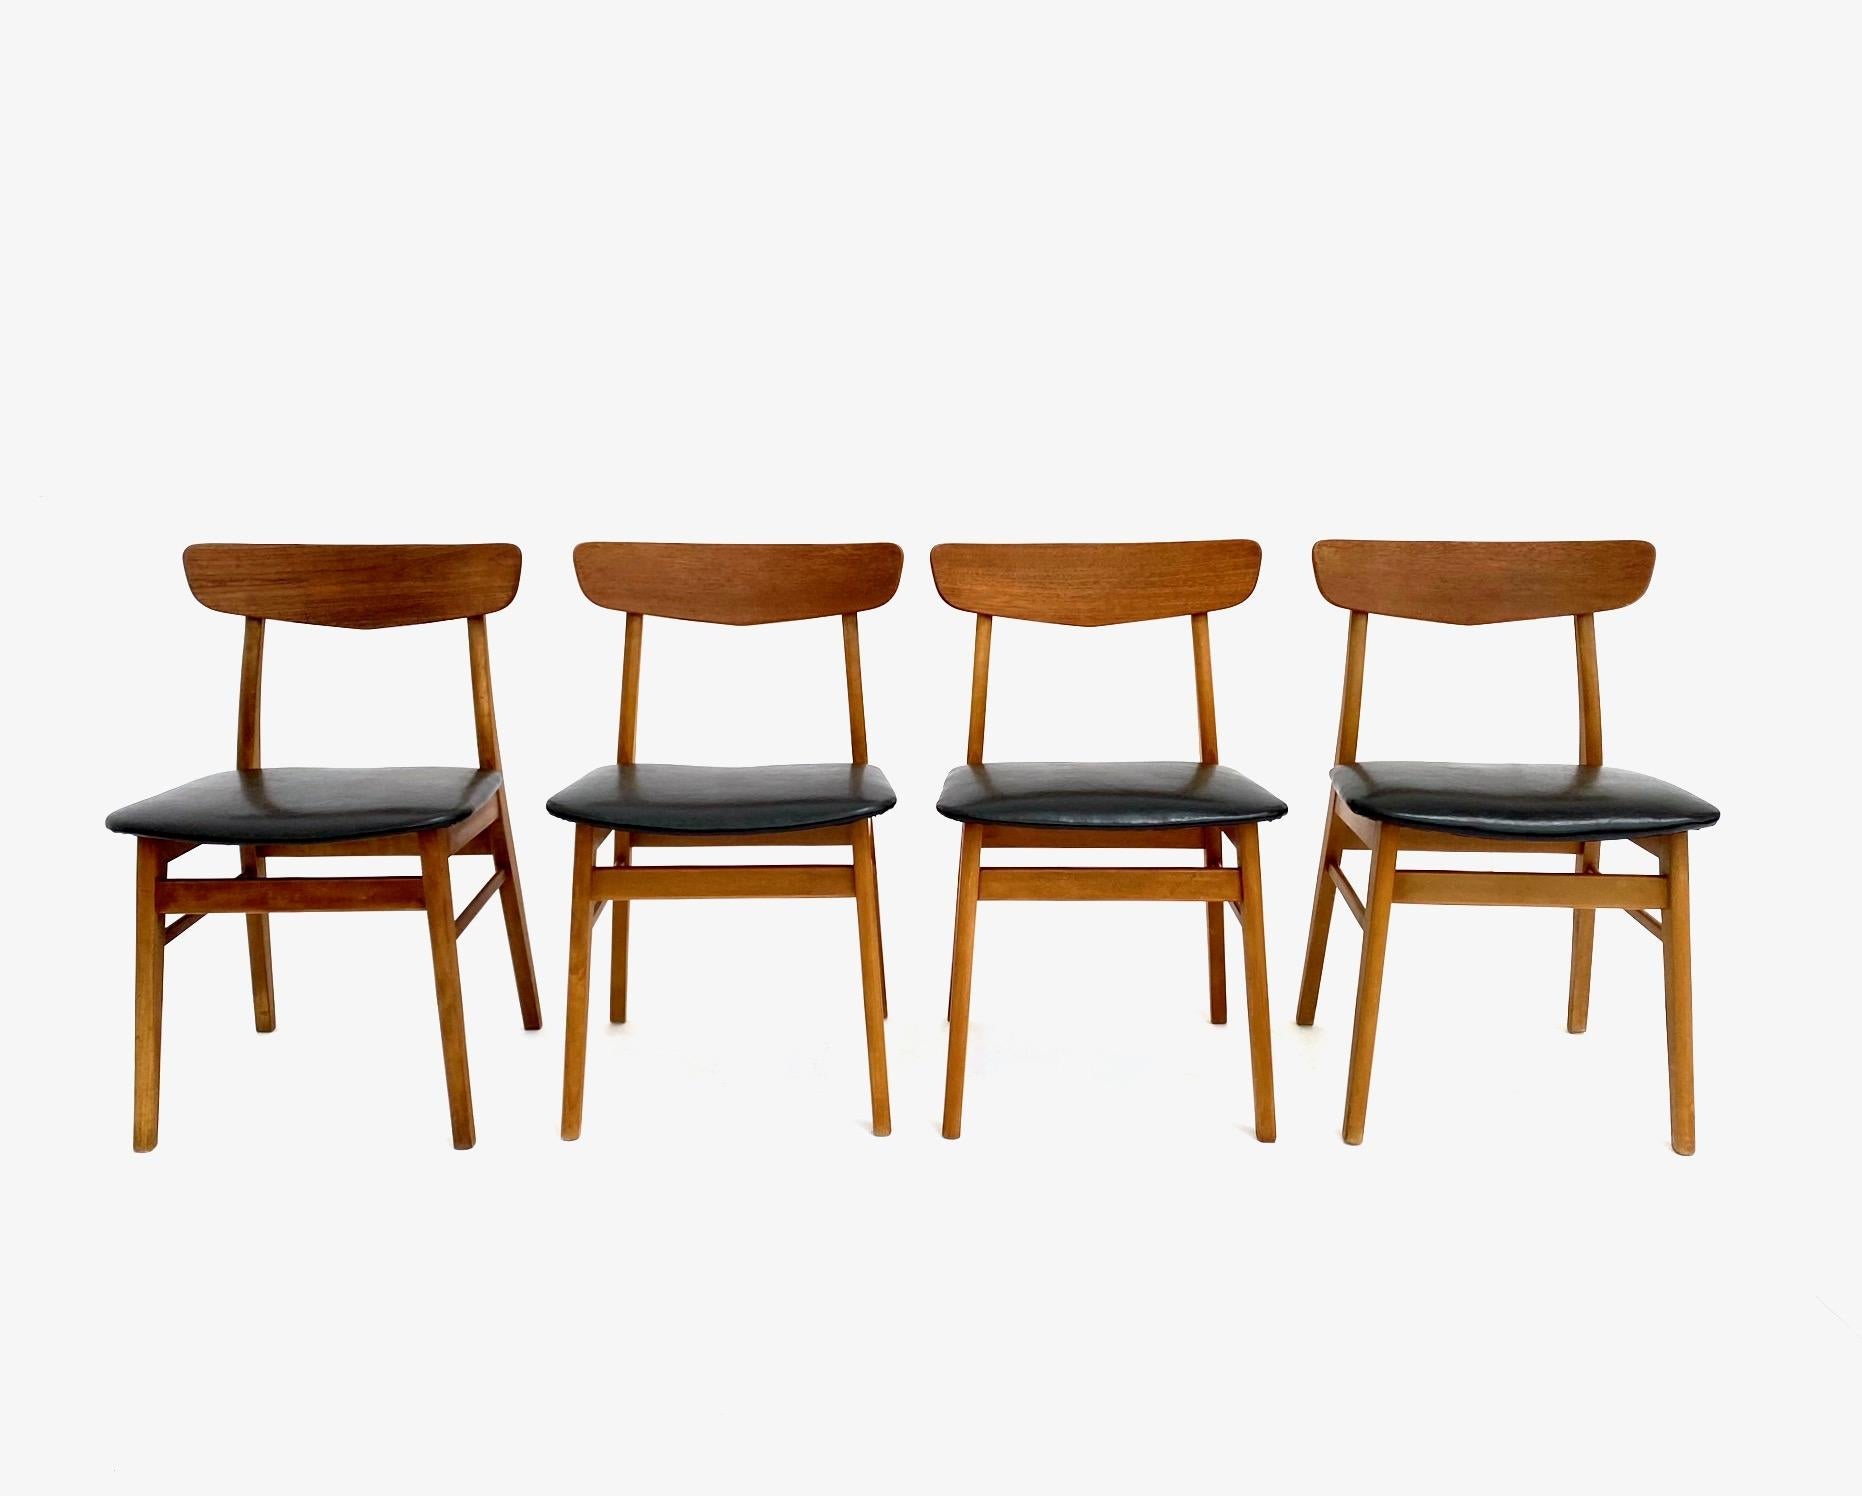 A beautiful set of 4 teak & beech black vinyl dining chairs by Farstrup Møbelfabrik, these would make a stylish addition to any dining area.

The chairs have wide seat pads and sculptured timber backrests for enhanced comfort. A striking piece of